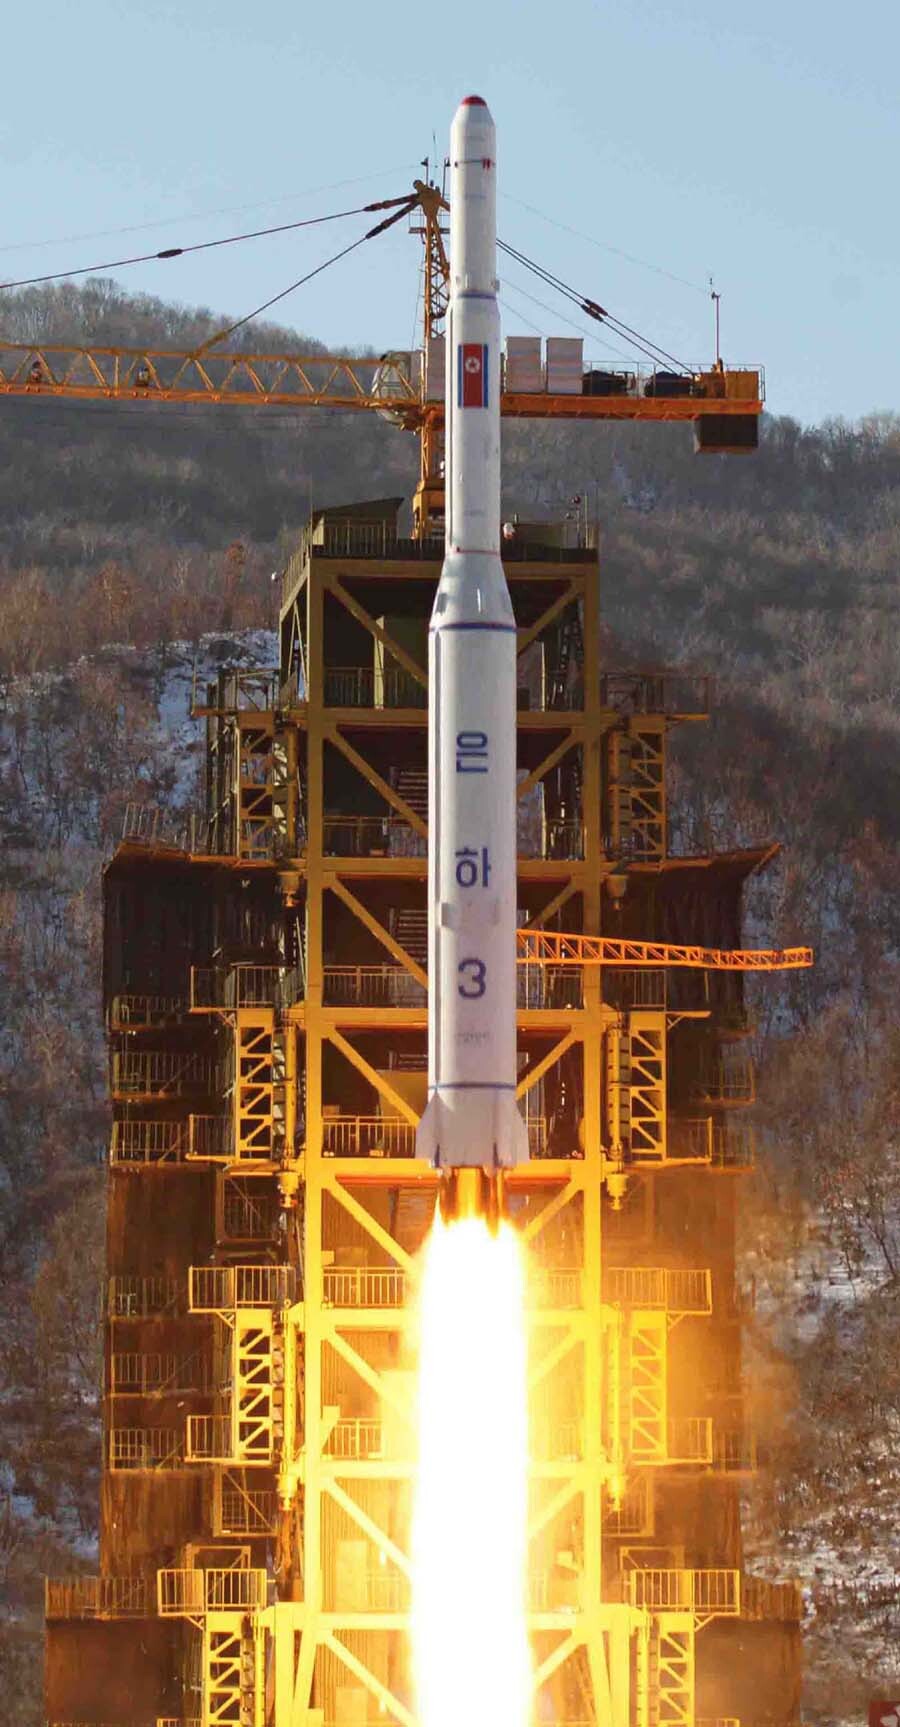 North Korea‘s Unha-3 rocket lifts off from the Sohae launching station in Tongchang-ri